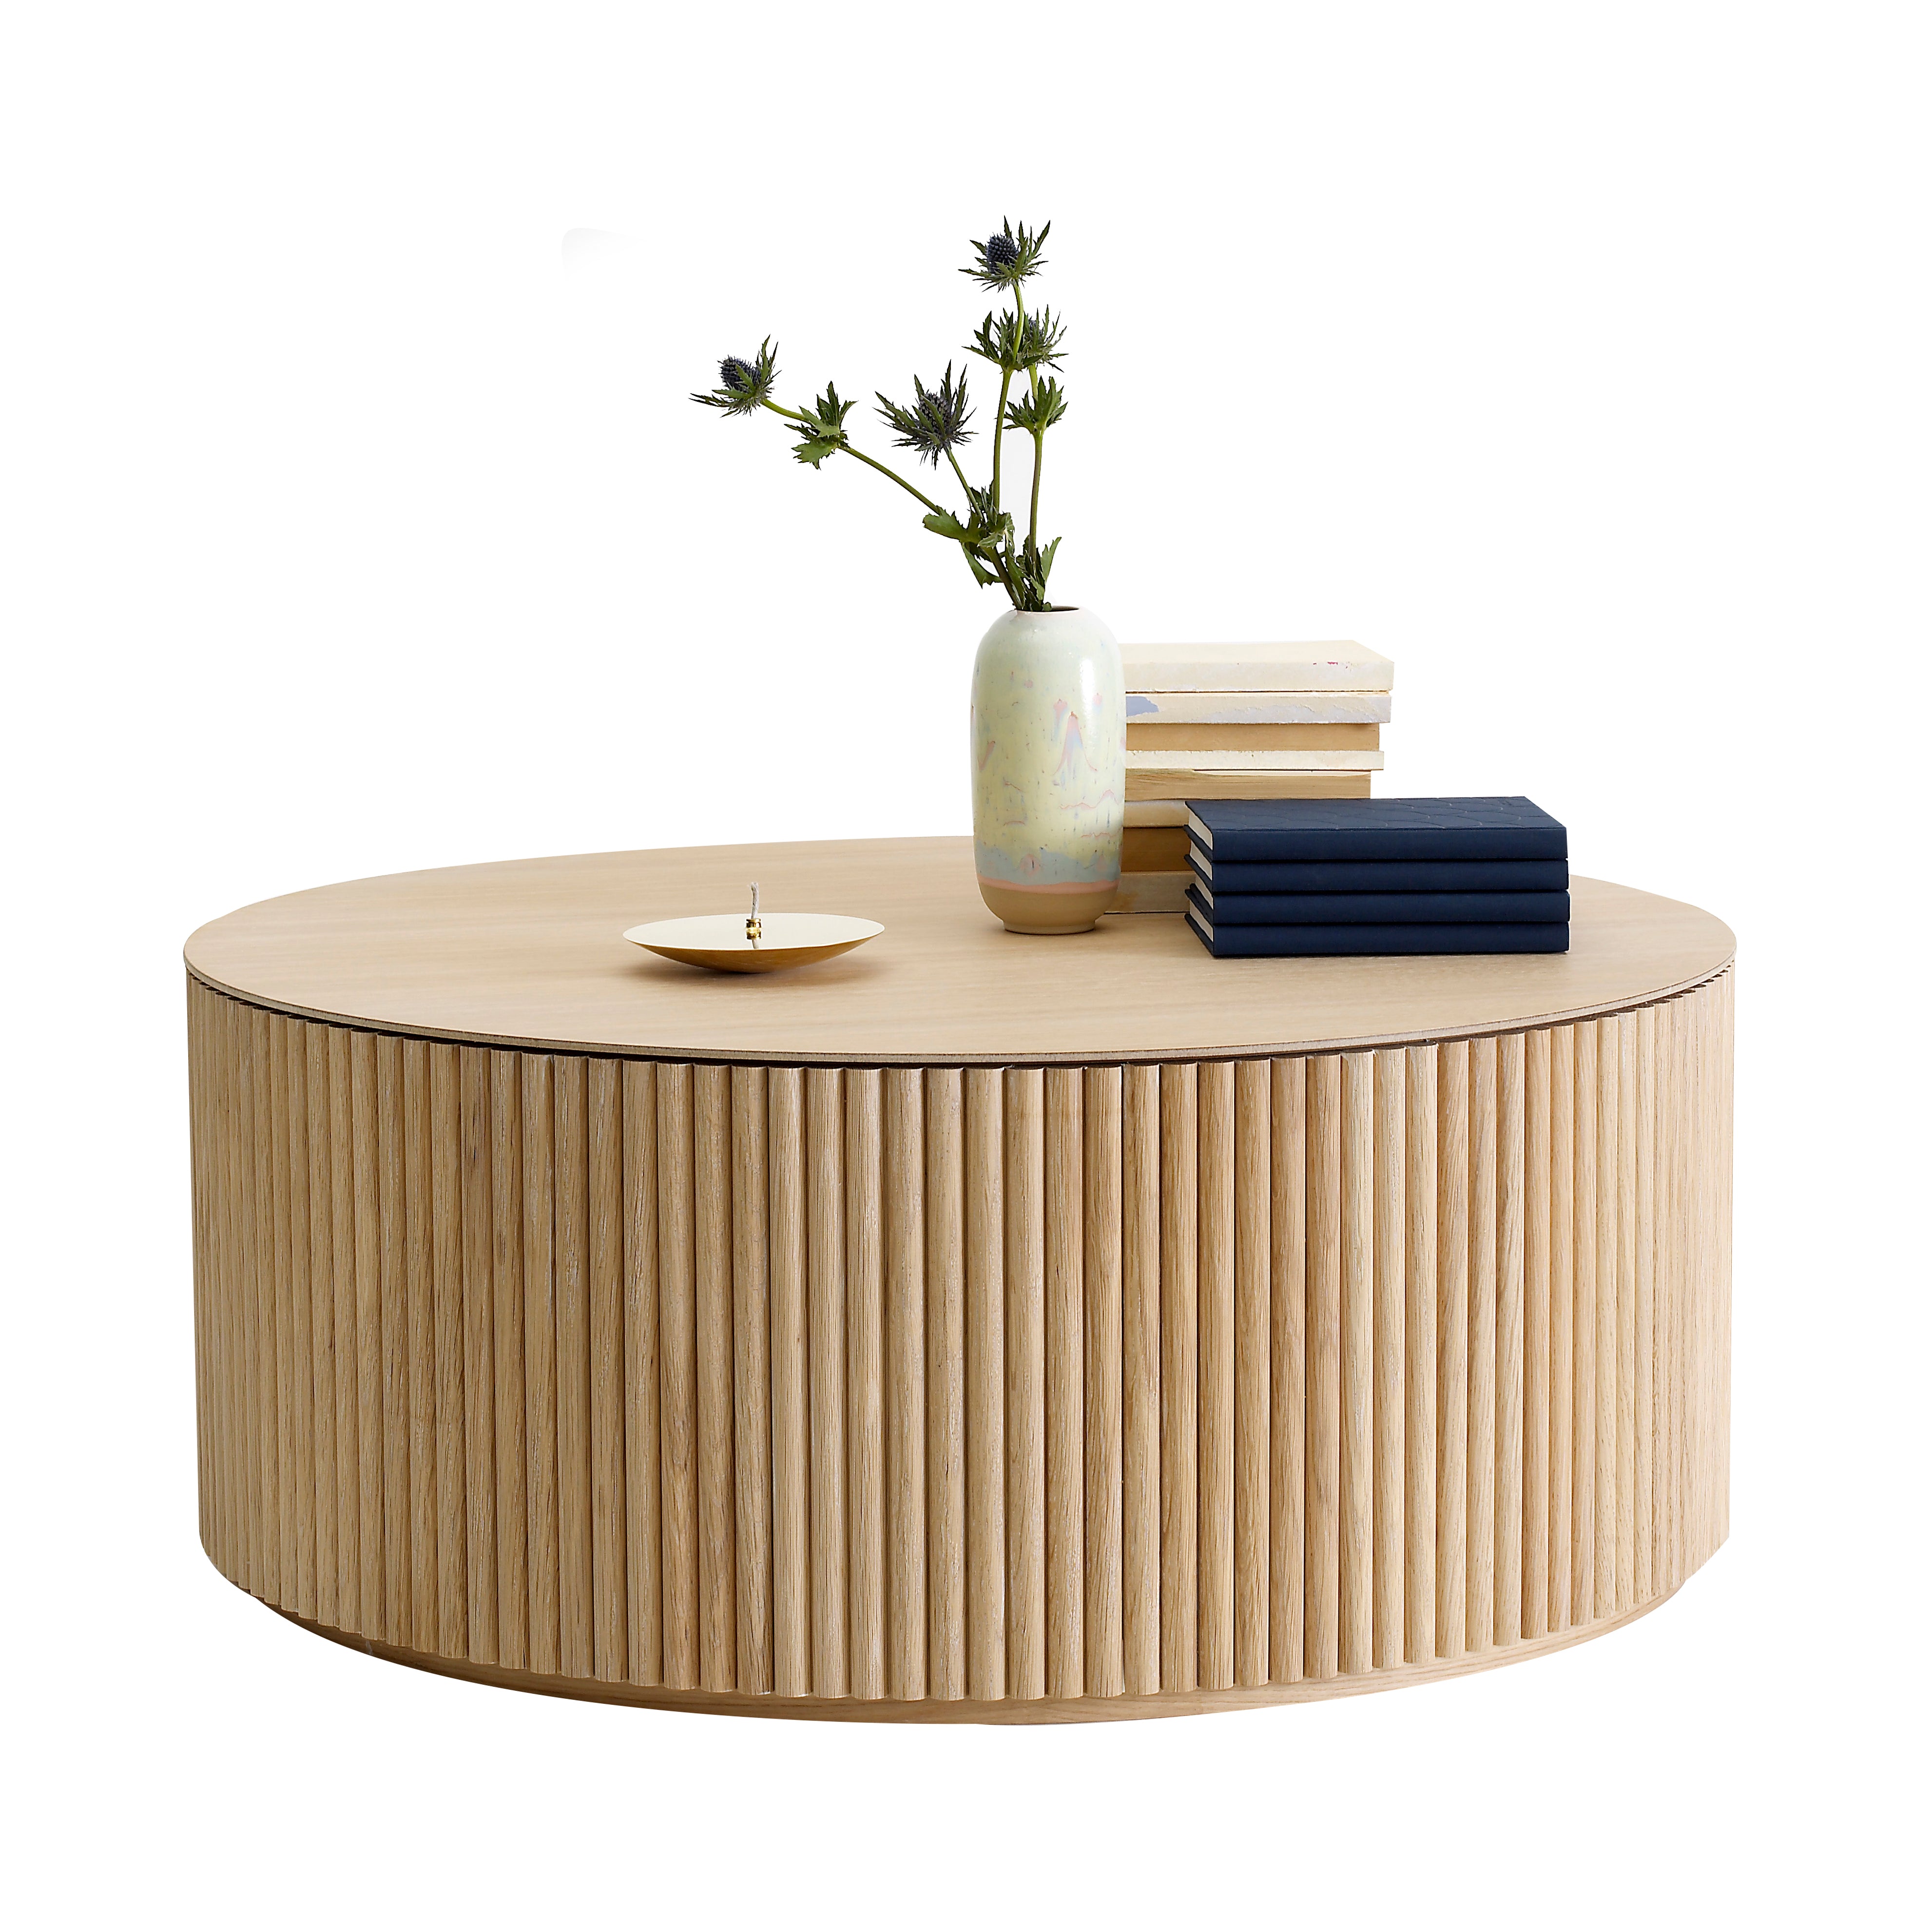 Grand Palais Coffee Table: White Stained Ash